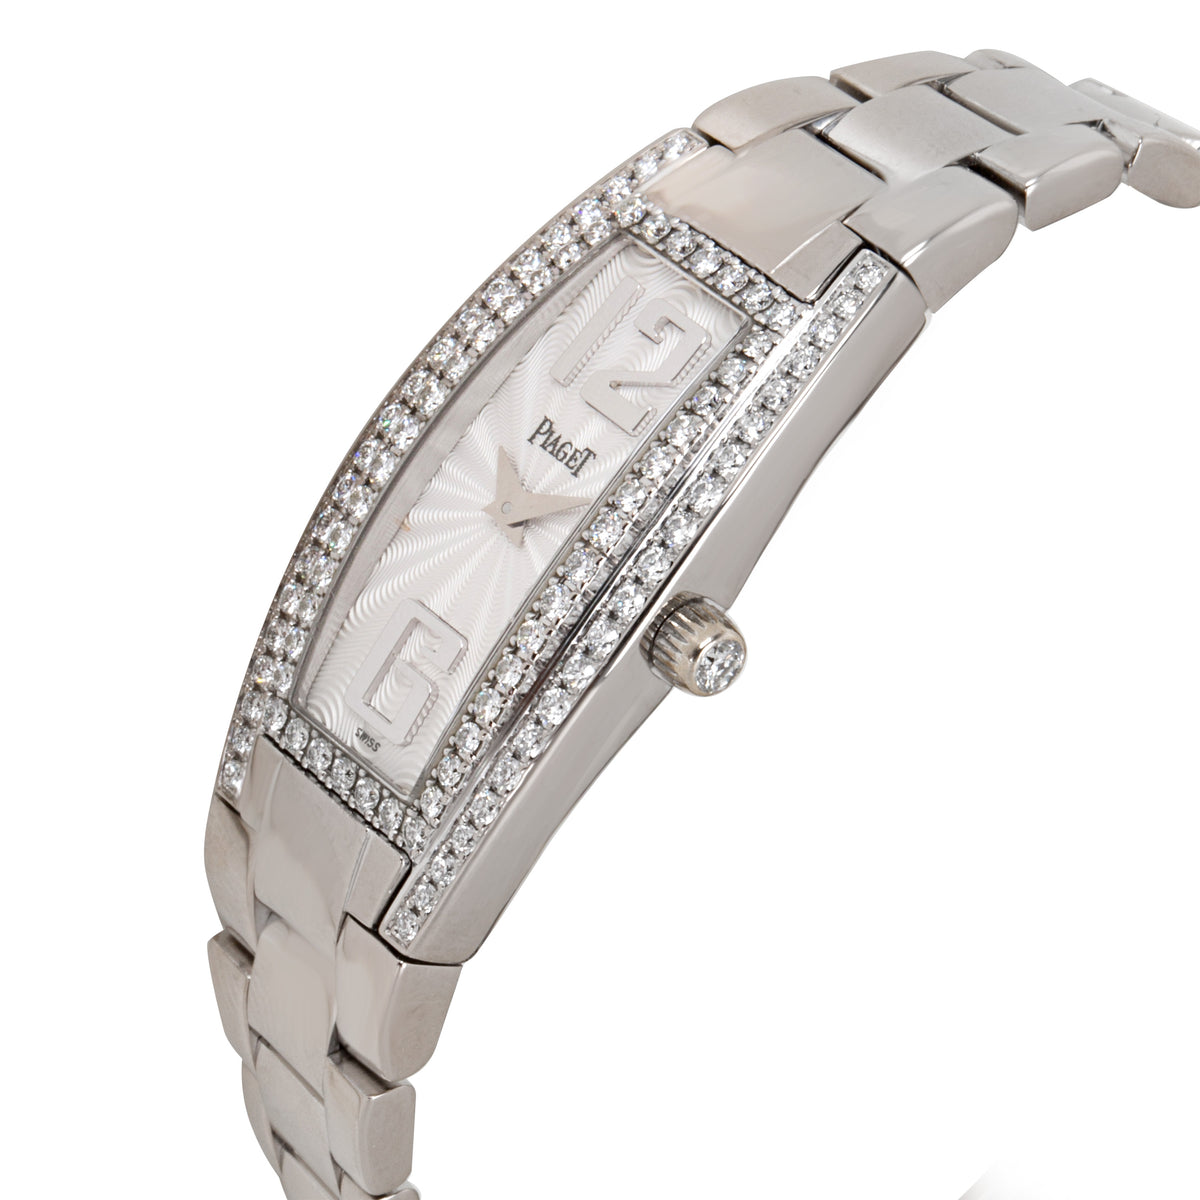 Piaget Limelight G0A29129 Women's Watch in 18kt White Gold